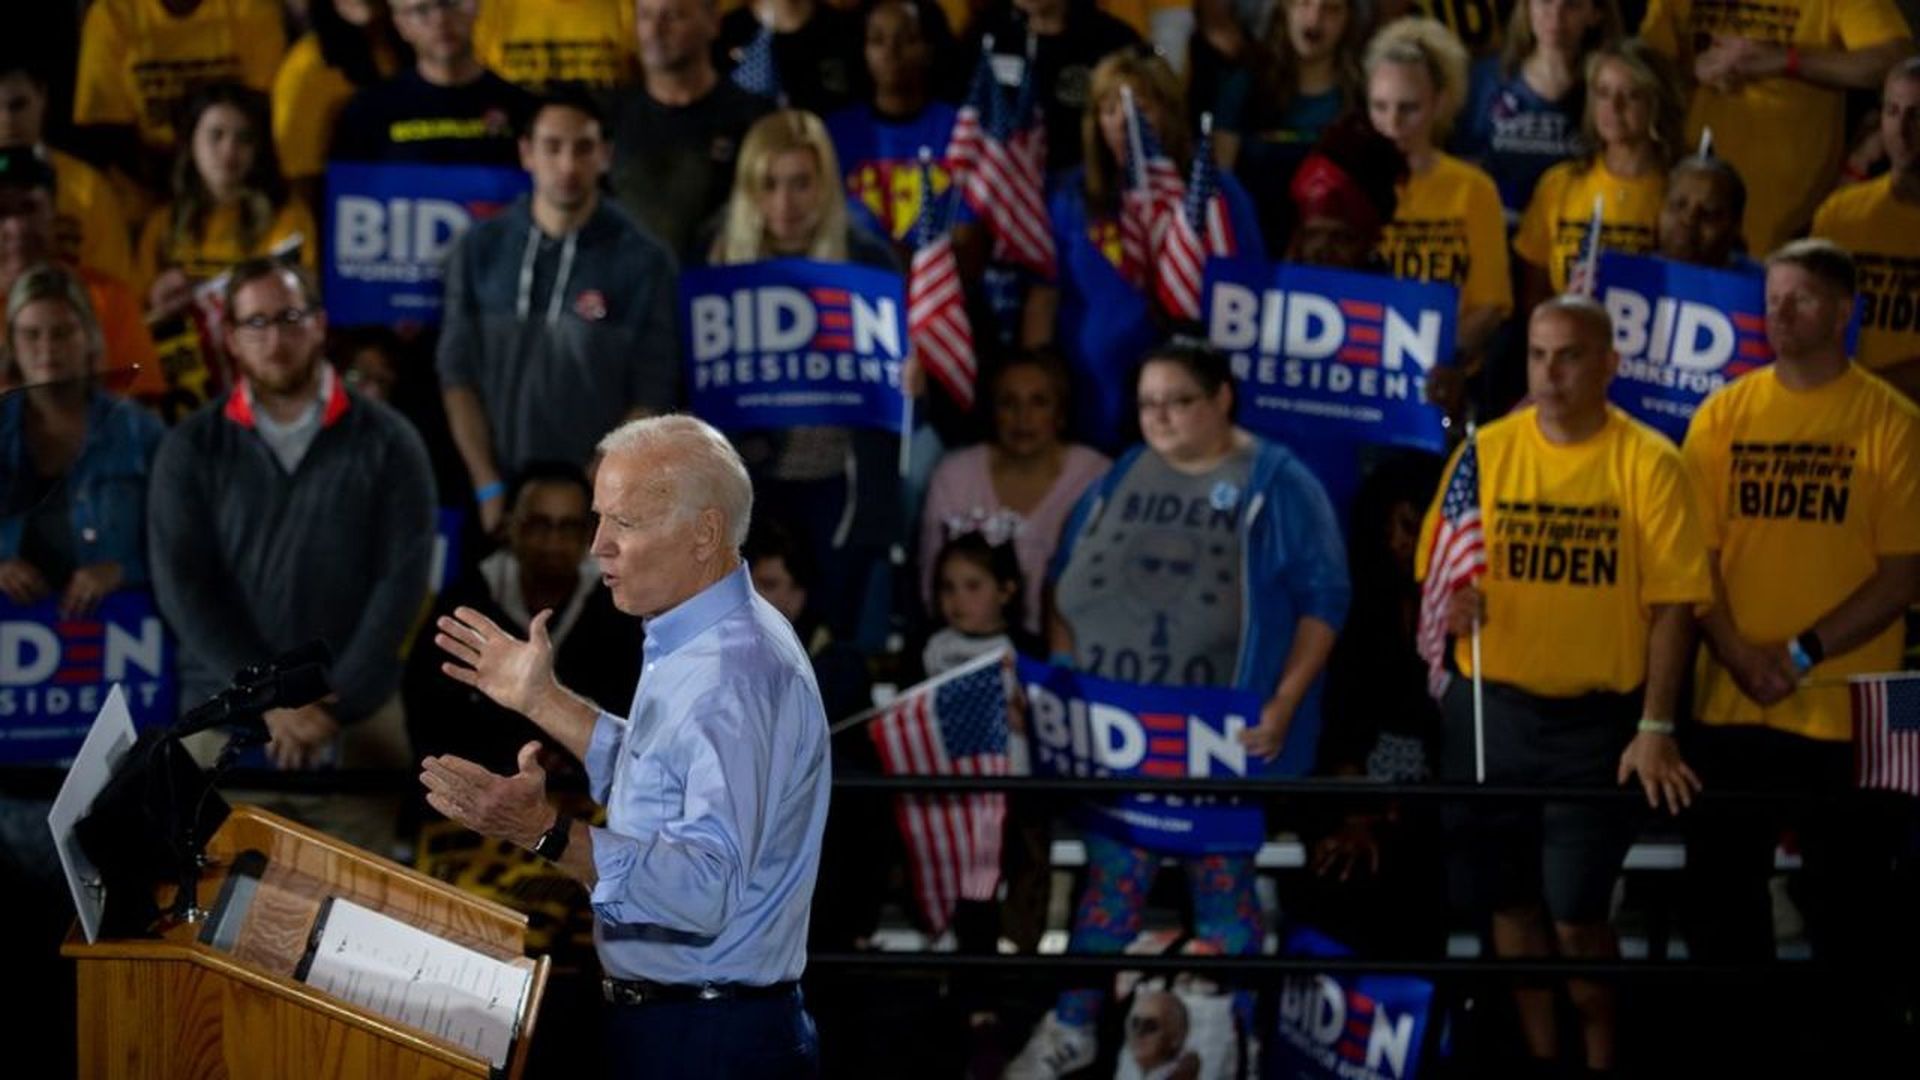 Former Vice President Joe Biden speaks at a campaign rally in Pittsburgh. Photo: Jeff Swensen/Getty Images